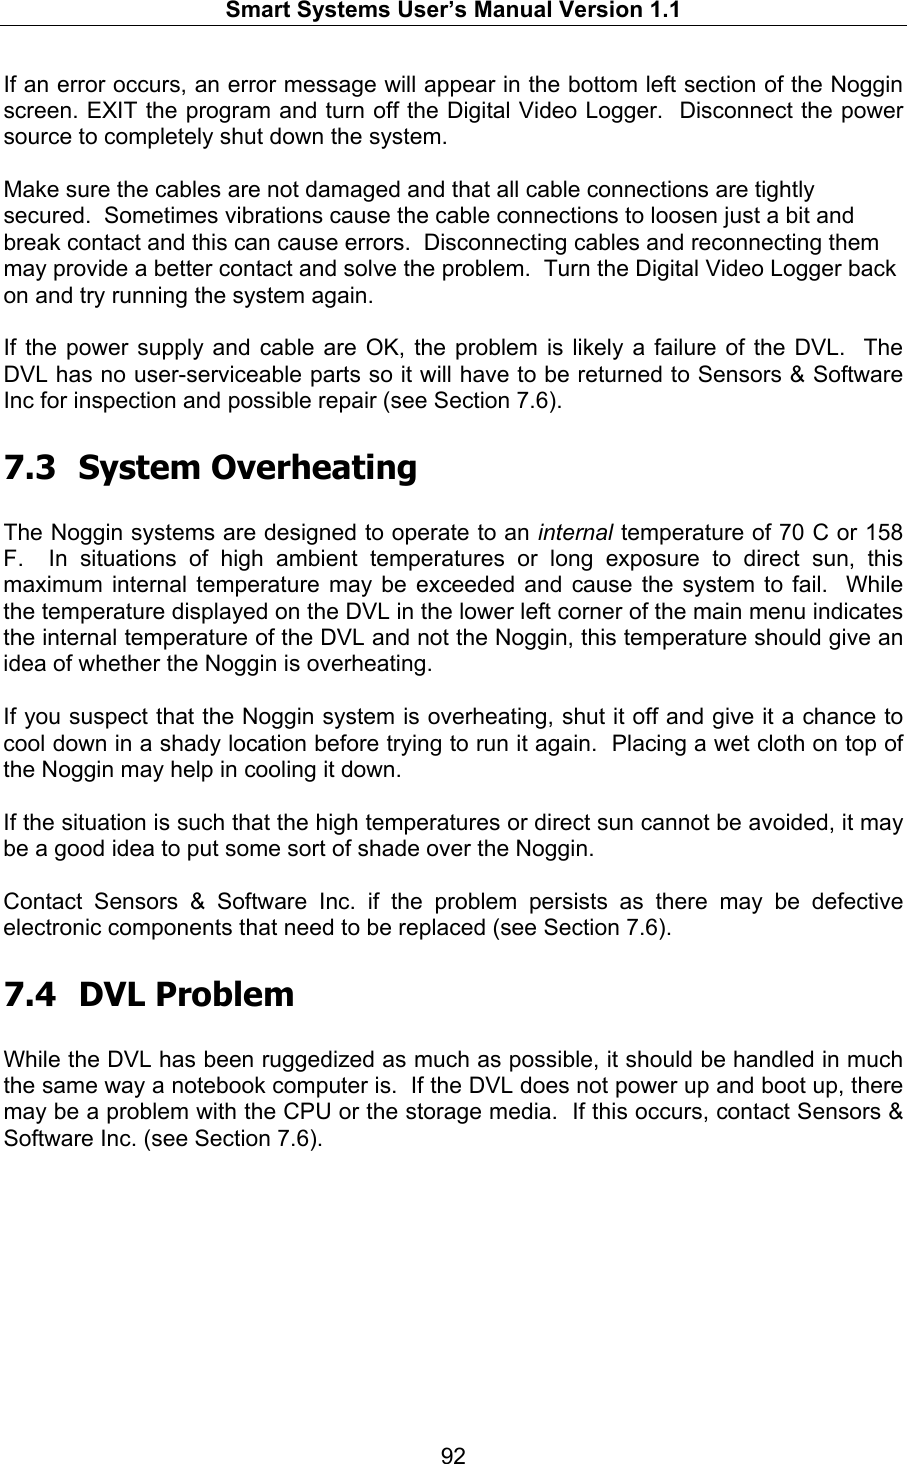   Smart Systems User’s Manual Version 1.1  92  If an error occurs, an error message will appear in the bottom left section of the Noggin screen. EXIT the program and turn off the Digital Video Logger.  Disconnect the power source to completely shut down the system.  Make sure the cables are not damaged and that all cable connections are tightly secured.  Sometimes vibrations cause the cable connections to loosen just a bit and break contact and this can cause errors.  Disconnecting cables and reconnecting them may provide a better contact and solve the problem.  Turn the Digital Video Logger back on and try running the system again.  If the power supply and cable are OK, the problem is likely a failure of the DVL.  The DVL has no user-serviceable parts so it will have to be returned to Sensors &amp; Software Inc for inspection and possible repair (see Section 7.6).  7.3 System Overheating  The Noggin systems are designed to operate to an internal temperature of 70 C or 158 F.  In situations of high ambient temperatures or long exposure to direct sun, this maximum internal temperature may be exceeded and cause the system to fail.  While the temperature displayed on the DVL in the lower left corner of the main menu indicates the internal temperature of the DVL and not the Noggin, this temperature should give an idea of whether the Noggin is overheating.  If you suspect that the Noggin system is overheating, shut it off and give it a chance to cool down in a shady location before trying to run it again.  Placing a wet cloth on top of the Noggin may help in cooling it down.  If the situation is such that the high temperatures or direct sun cannot be avoided, it may be a good idea to put some sort of shade over the Noggin.  Contact Sensors &amp; Software Inc. if the problem persists as there may be defective electronic components that need to be replaced (see Section 7.6).  7.4 DVL Problem  While the DVL has been ruggedized as much as possible, it should be handled in much the same way a notebook computer is.  If the DVL does not power up and boot up, there may be a problem with the CPU or the storage media.  If this occurs, contact Sensors &amp; Software Inc. (see Section 7.6). 